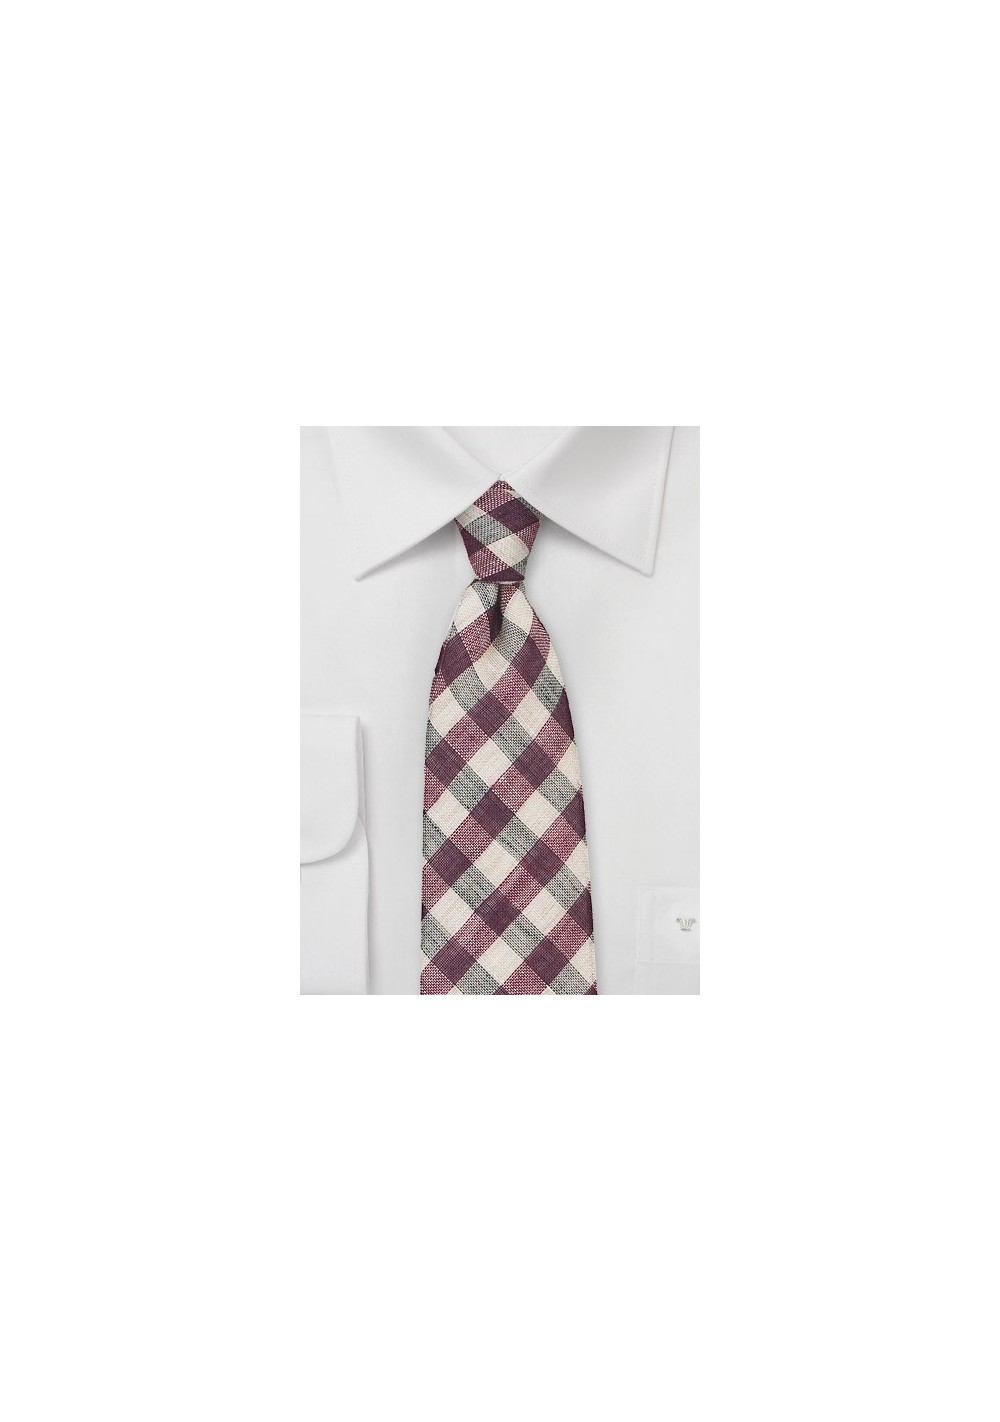 Wine Red and Linen Gingham Tie